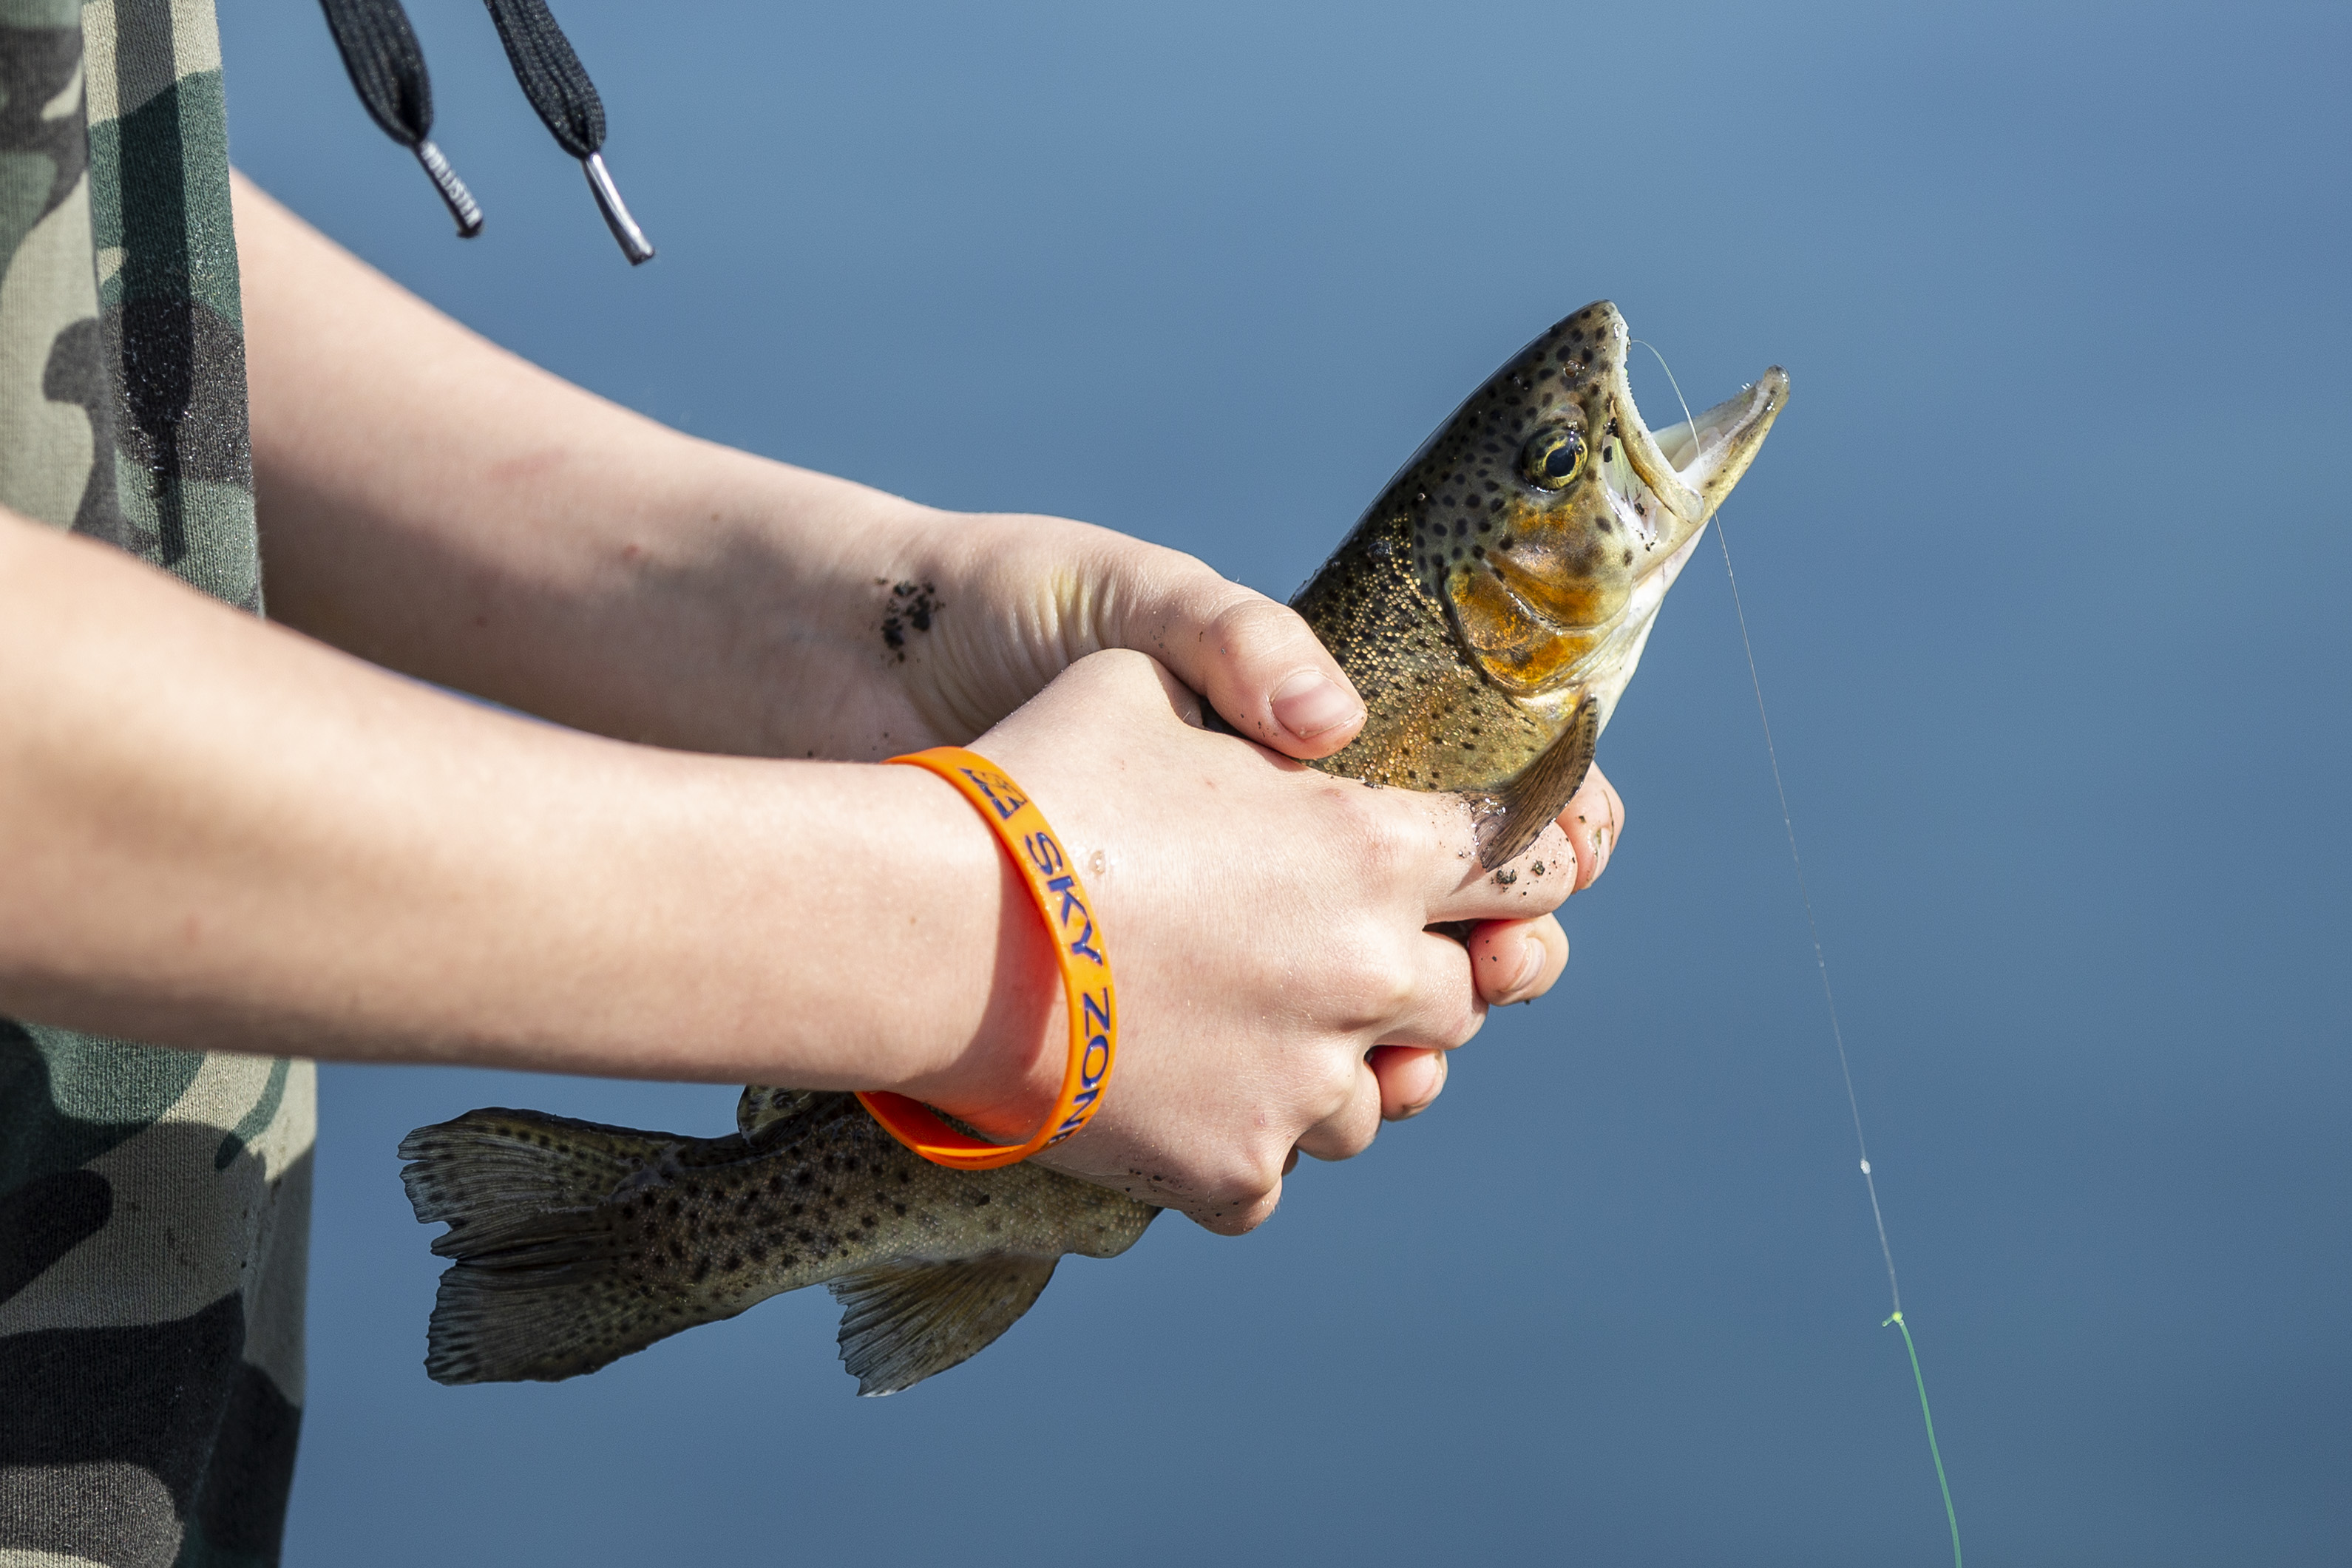 Gearing up: What you need to get started in trout fishing in Pennsylvania 